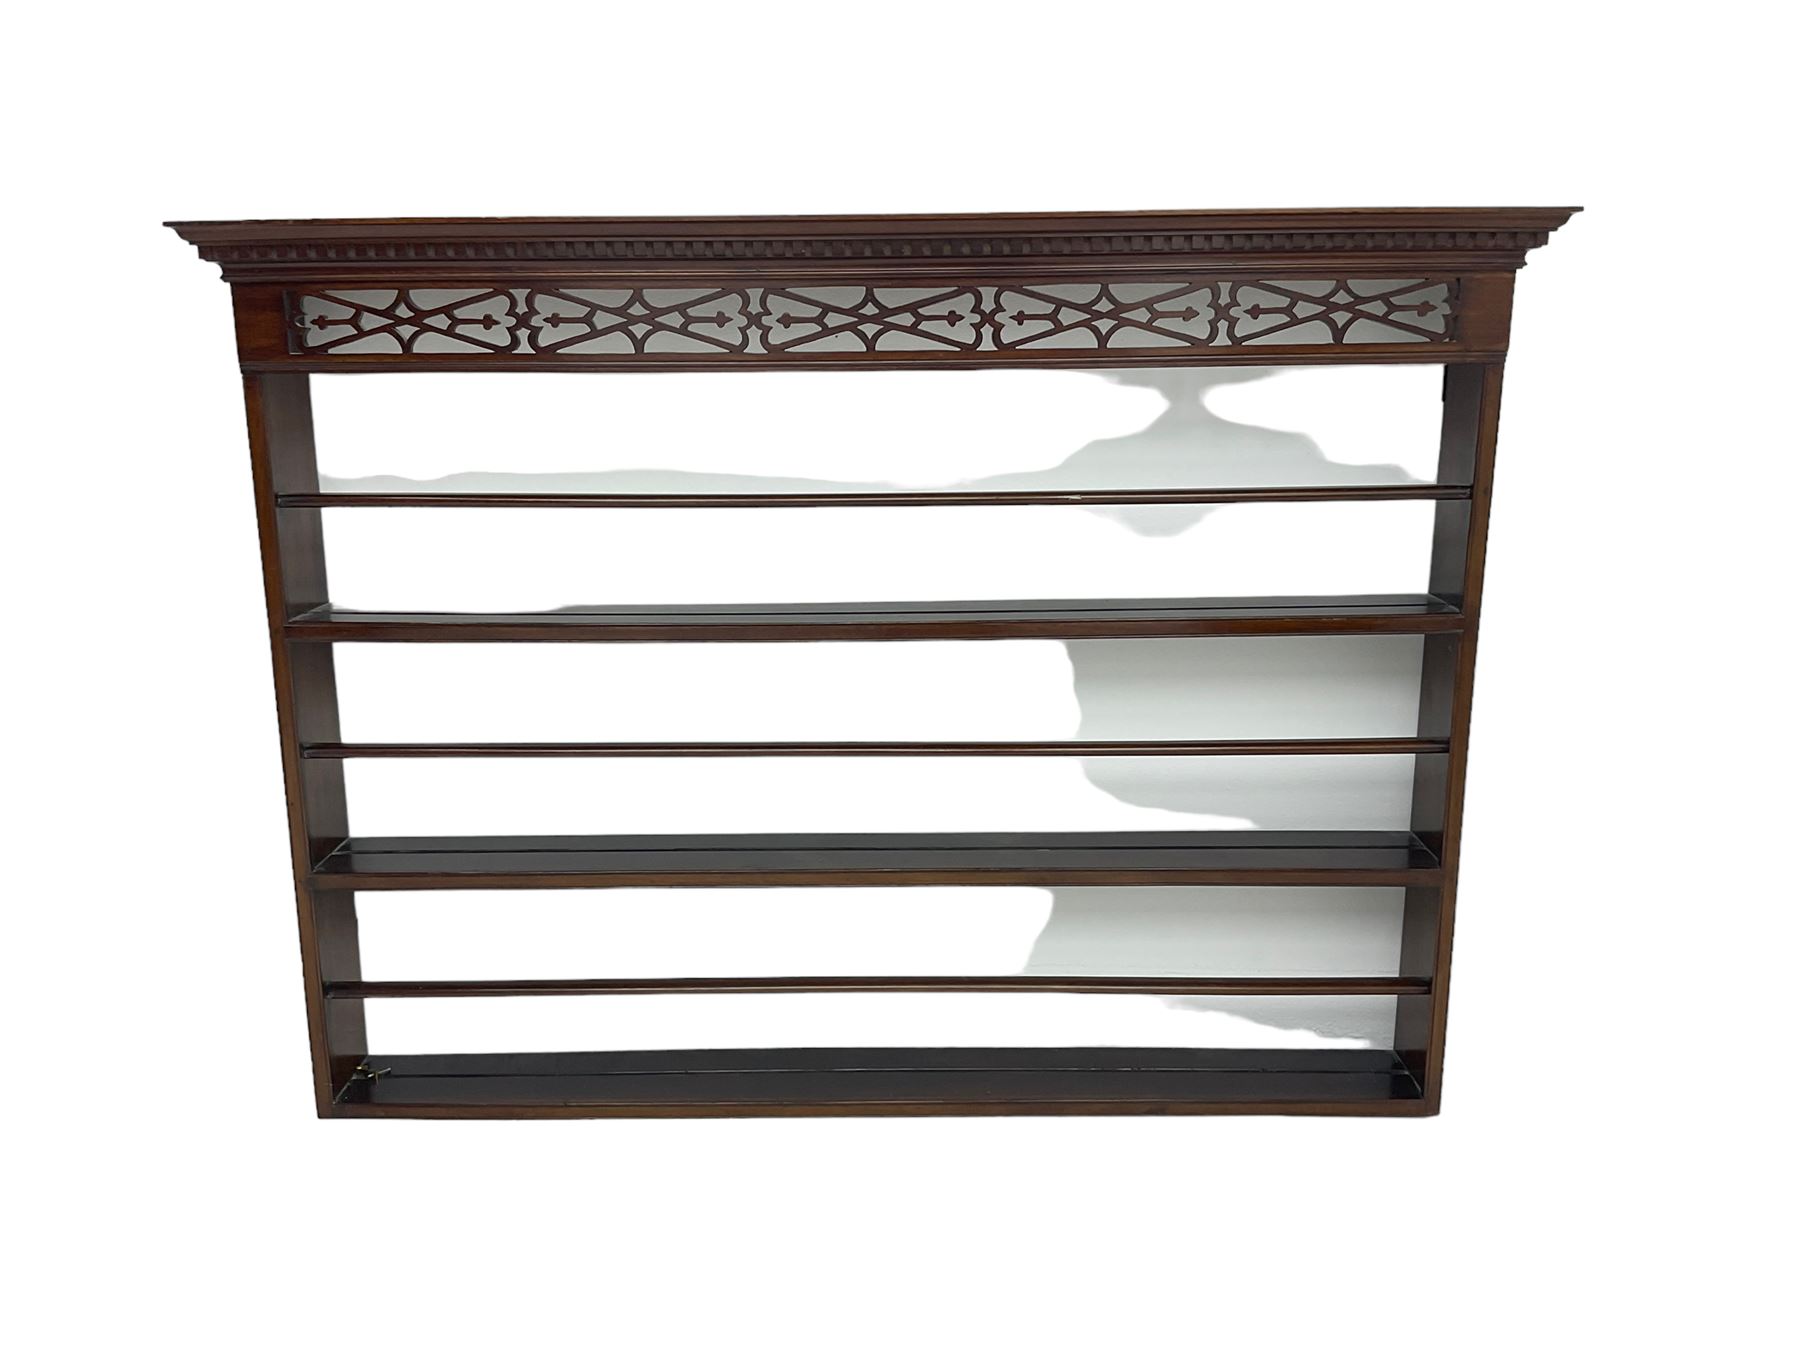 Chippendale design mahogany three-tier plate rack - Image 2 of 2